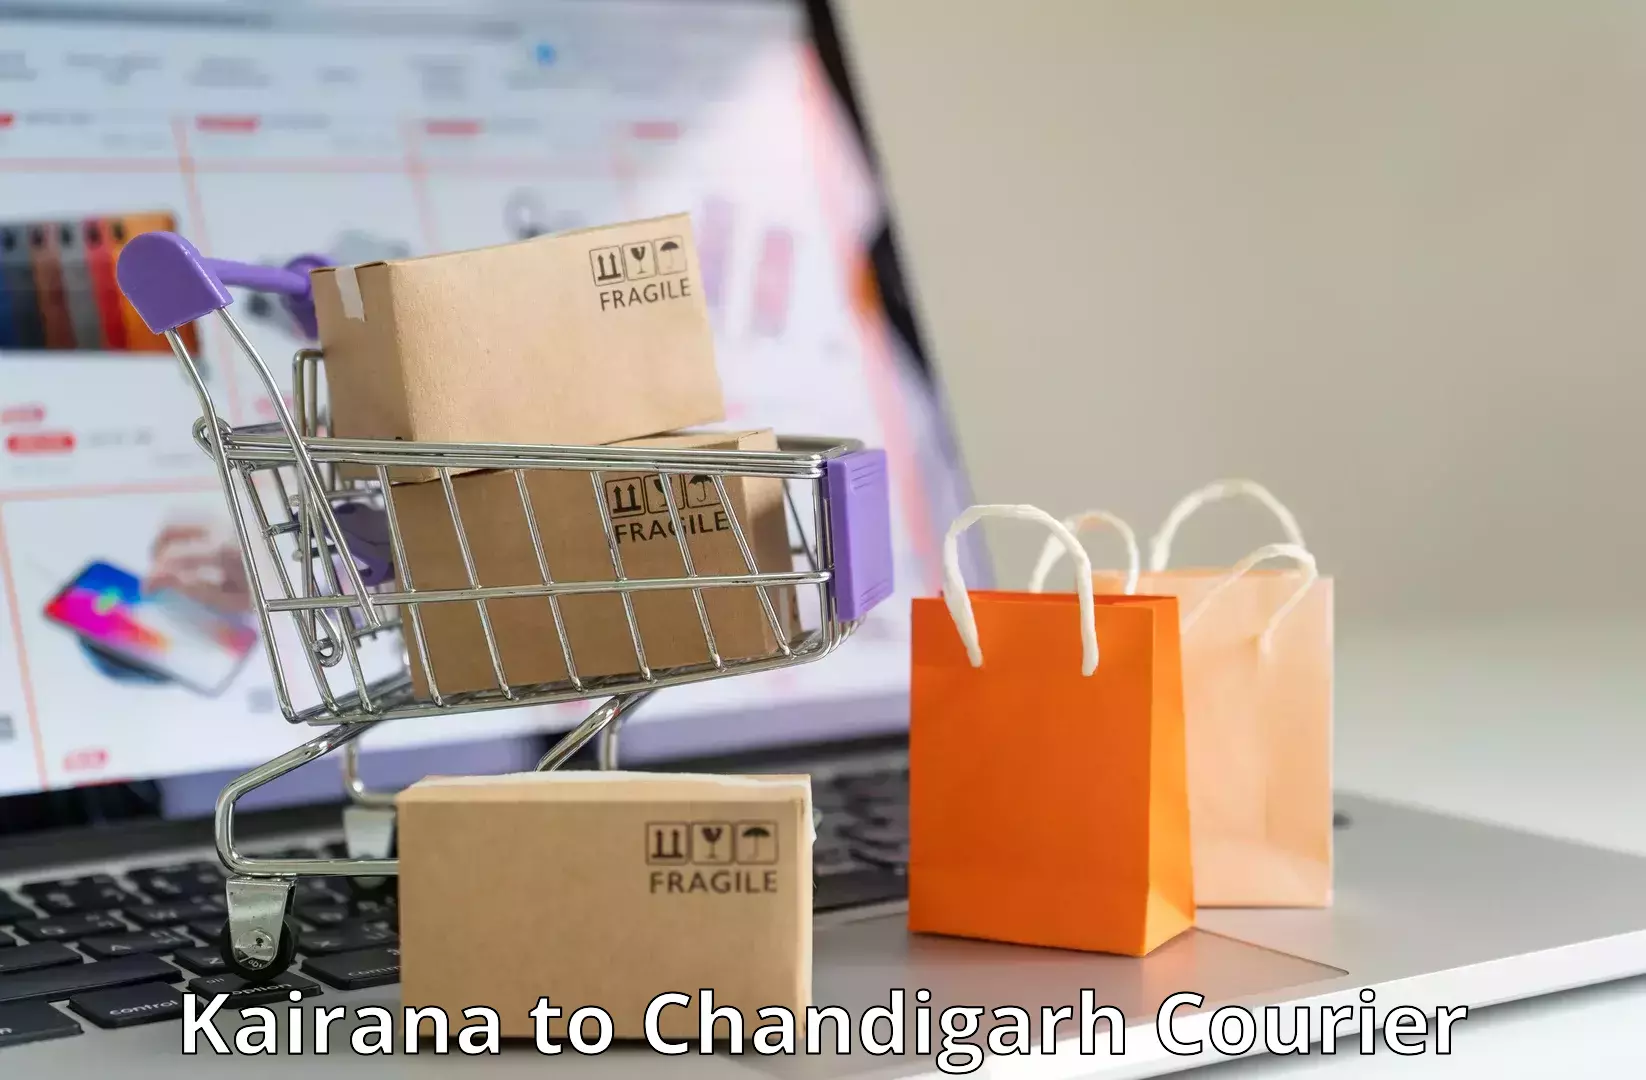 Short distance delivery Kairana to Chandigarh